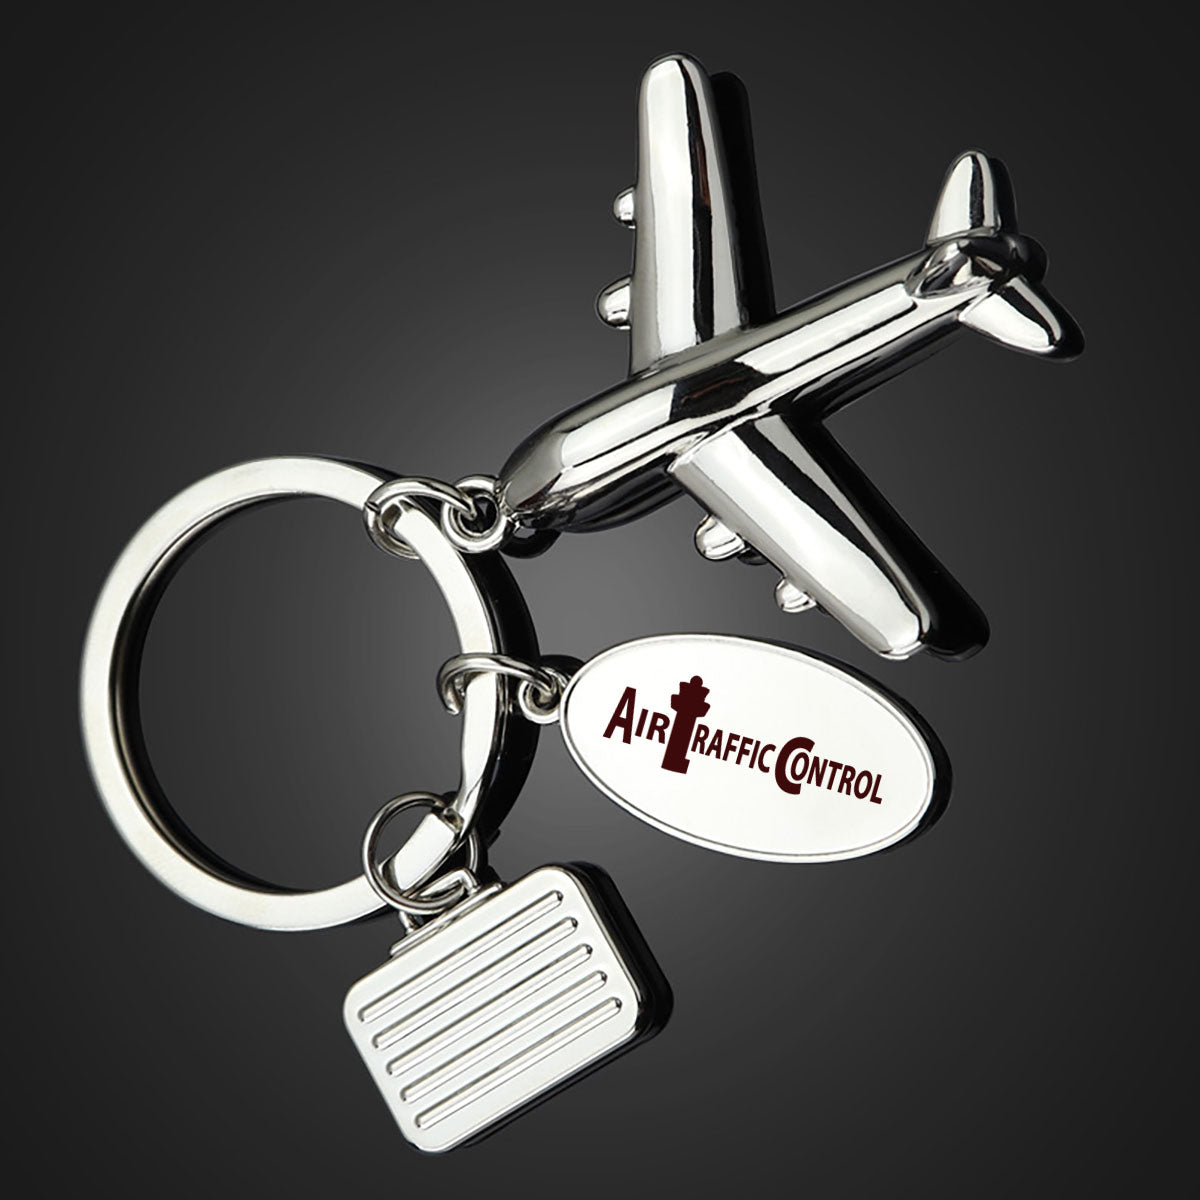 Air Traffic Control Designed Suitcase Airplane Key Chains